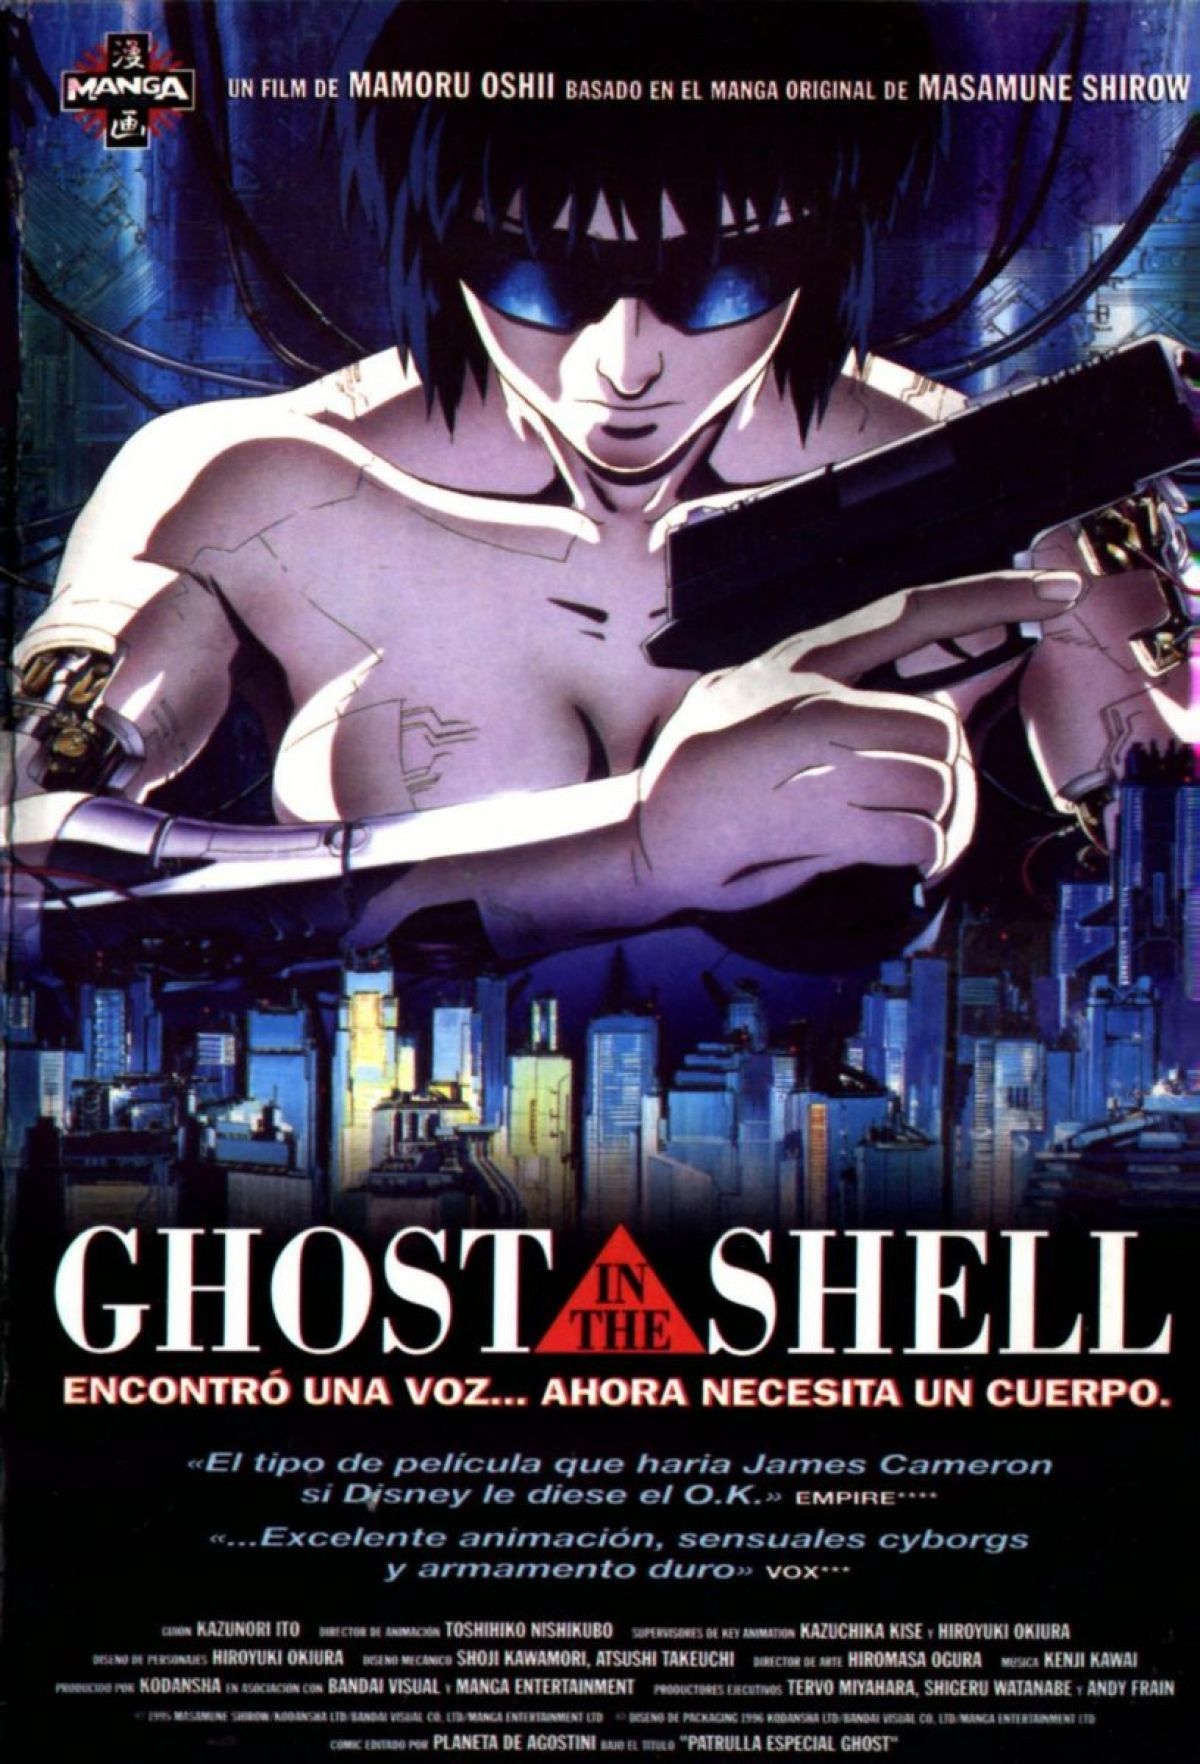 póster anime ghost in the shell